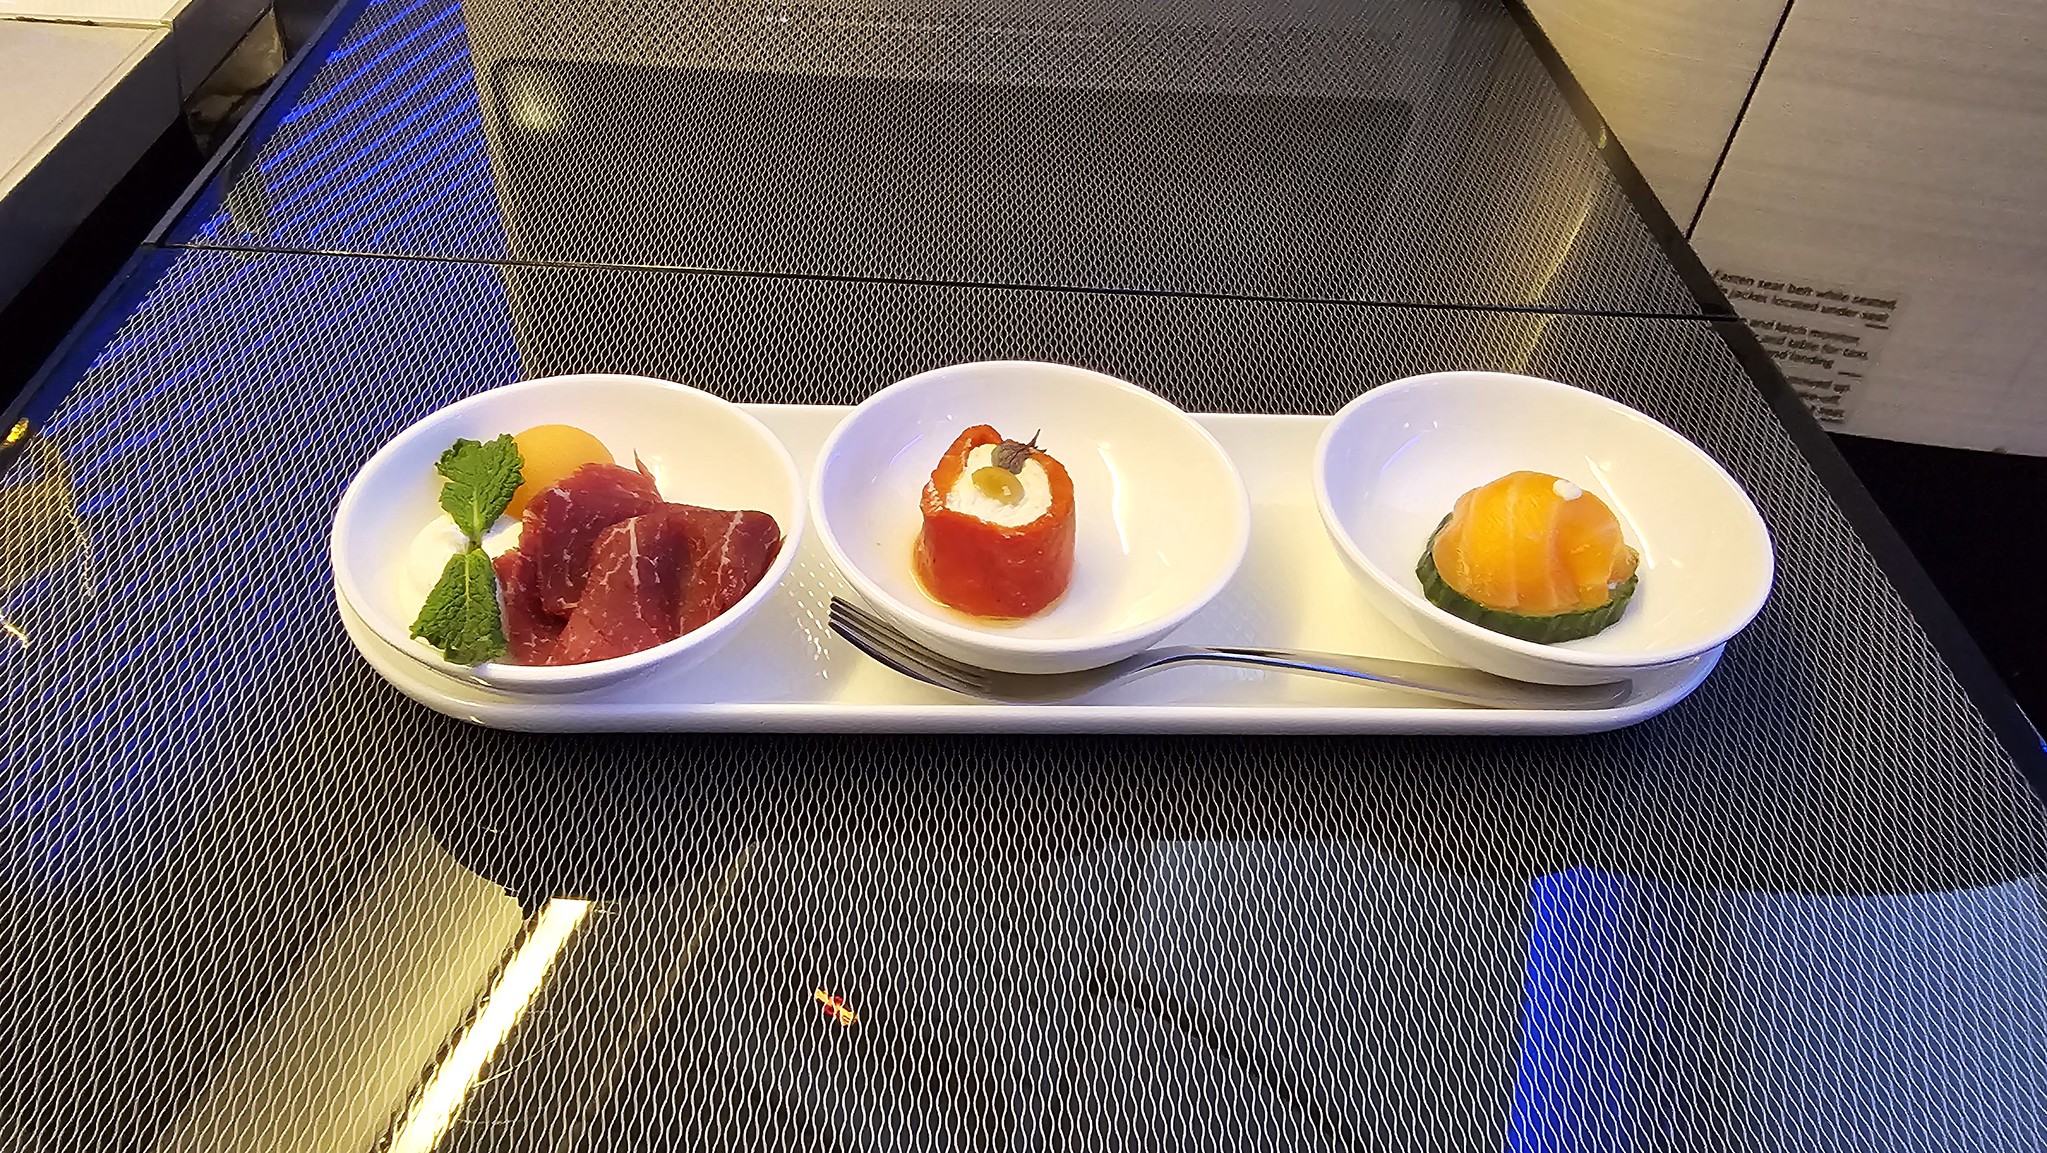 The amuse bouche on board the BA flight to New York